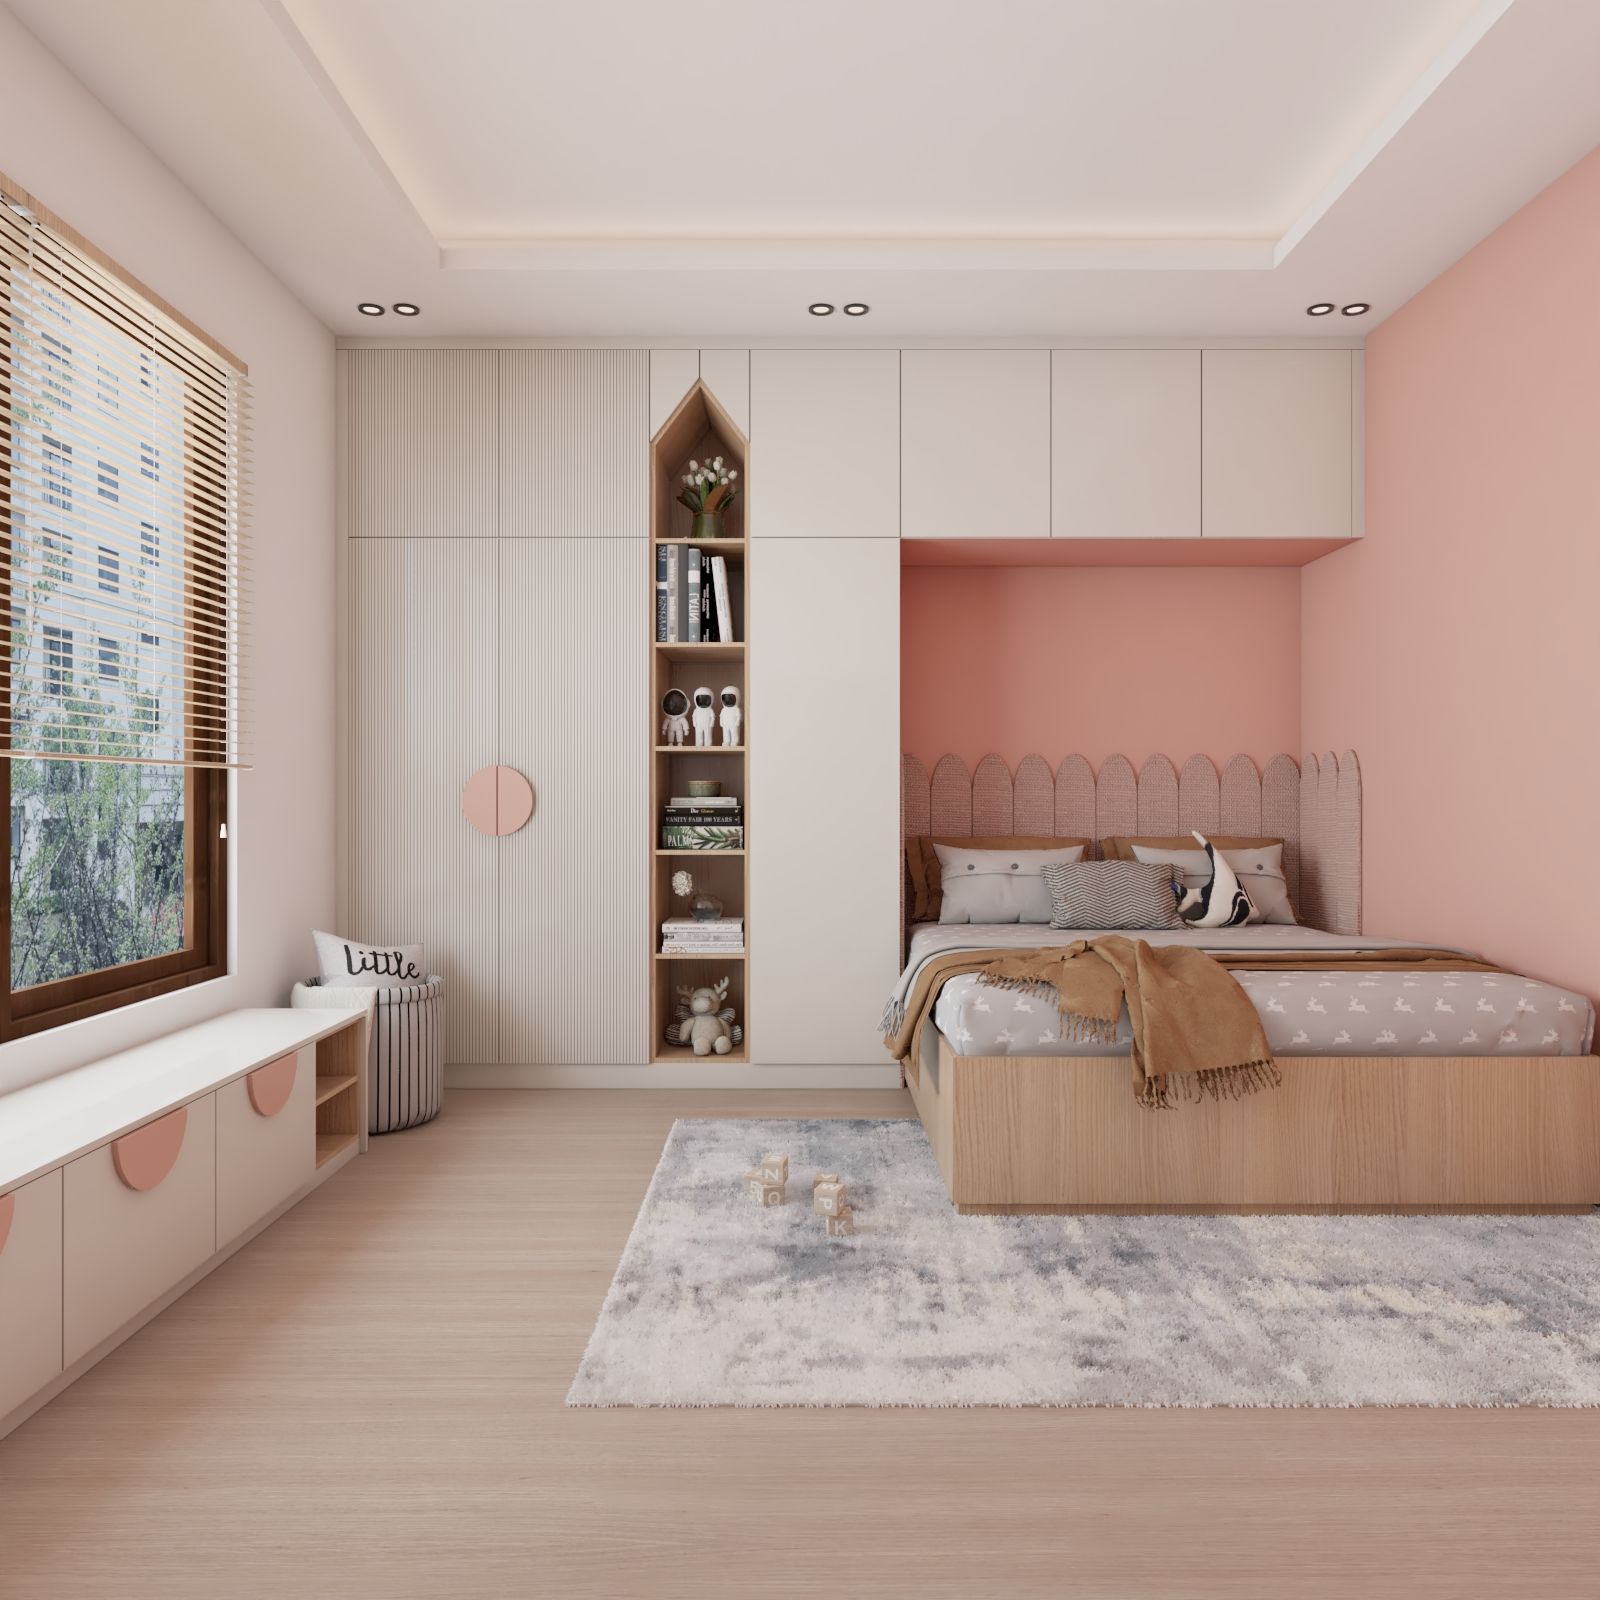 Contemporary Peach And White Kids Room Design With 3-Door Swing Wardrobe